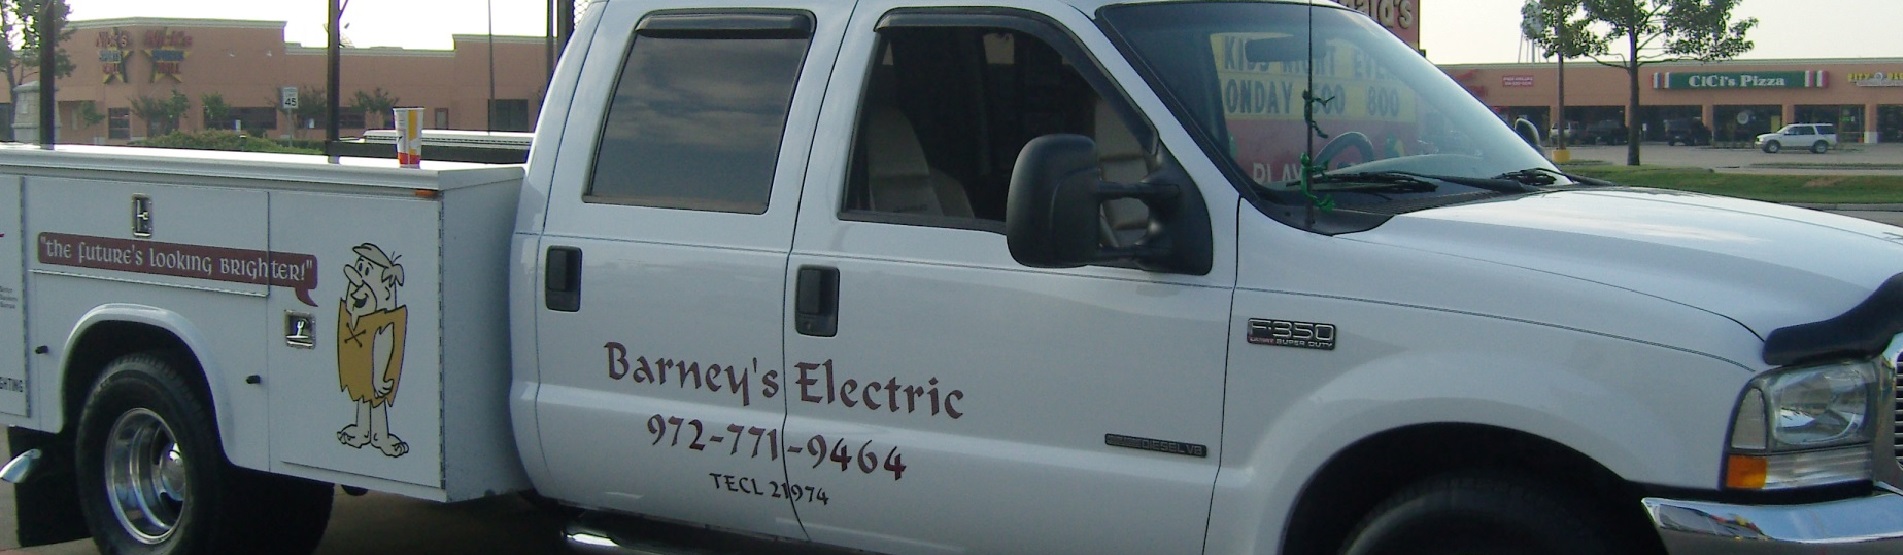 Electrician Forney TX Barney's Electric Full Service Electrician Residential Commercial Retail and New Construction Wiring Repair Installation Service 24 Hour Emergency Services Master Electrician Rockwall Texas